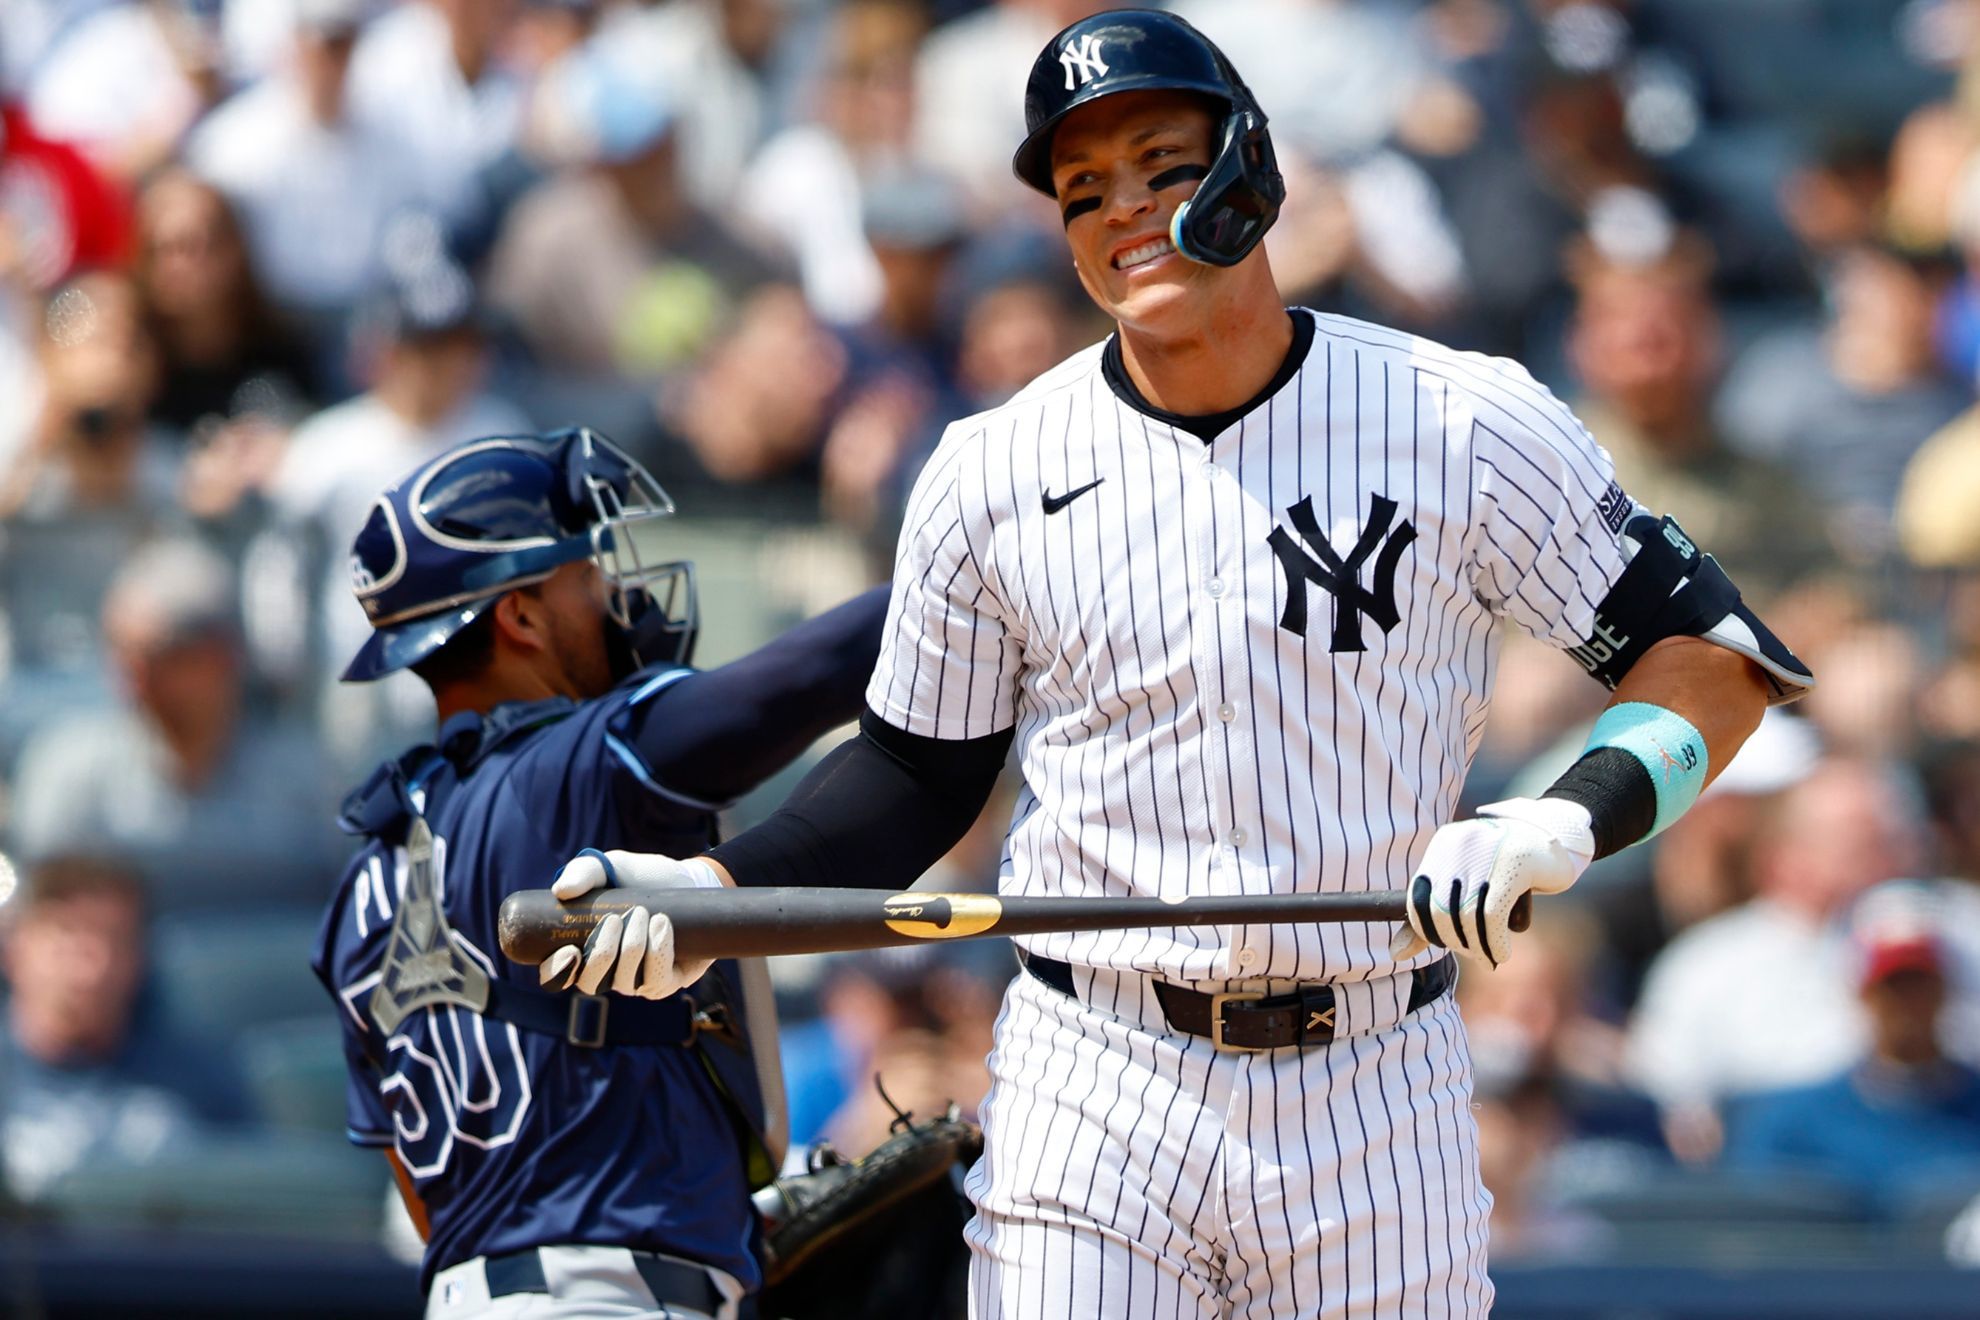 Aaron Judge reacts to being booed by Yankees fans; talks about his slump to start the season